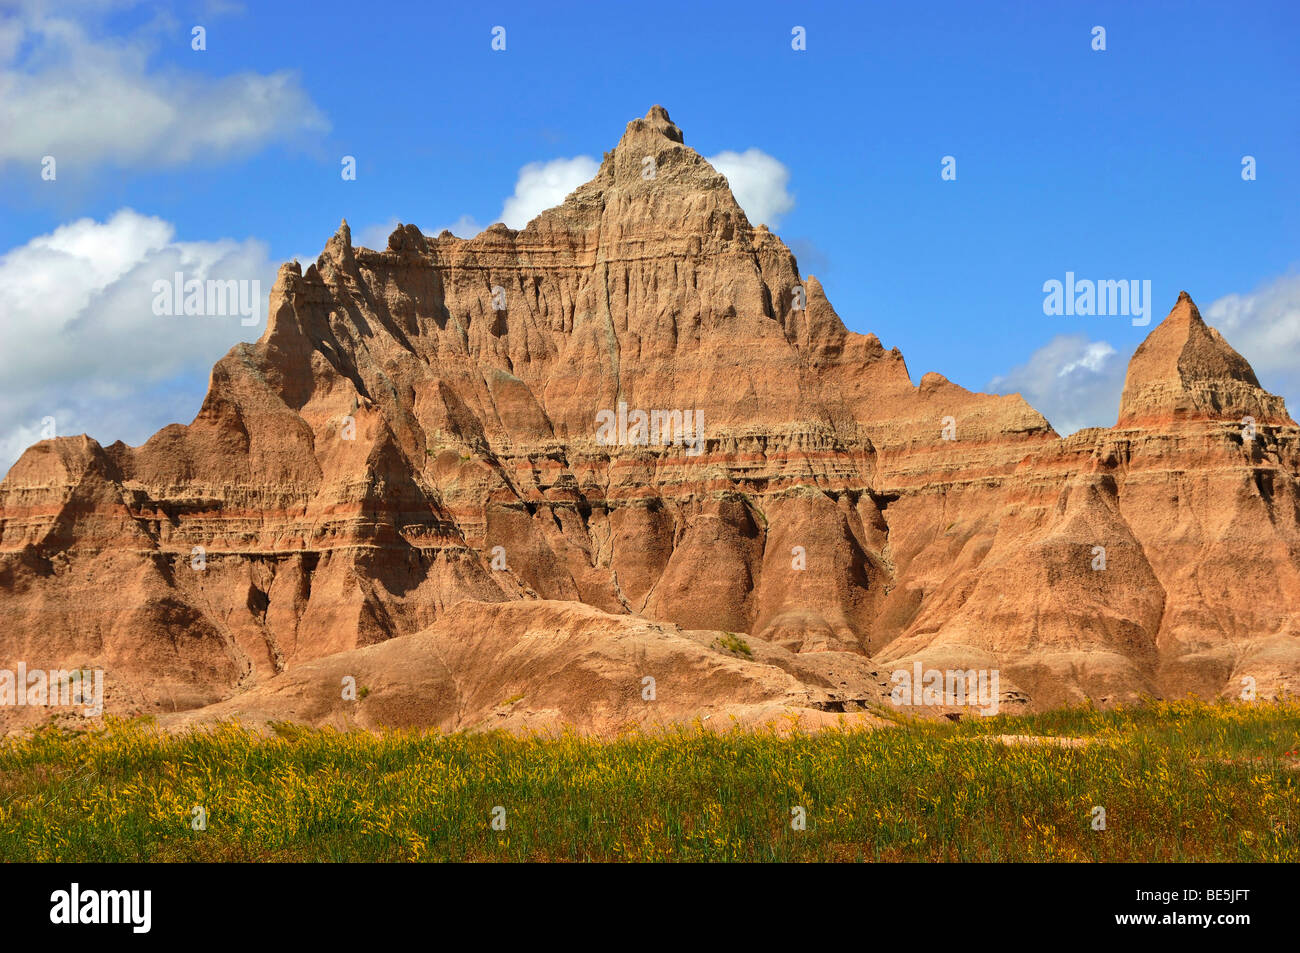 Peak close to the Visitors' Centre at the Badlands National Park near Wall in South Dakota, USA Stock Photo